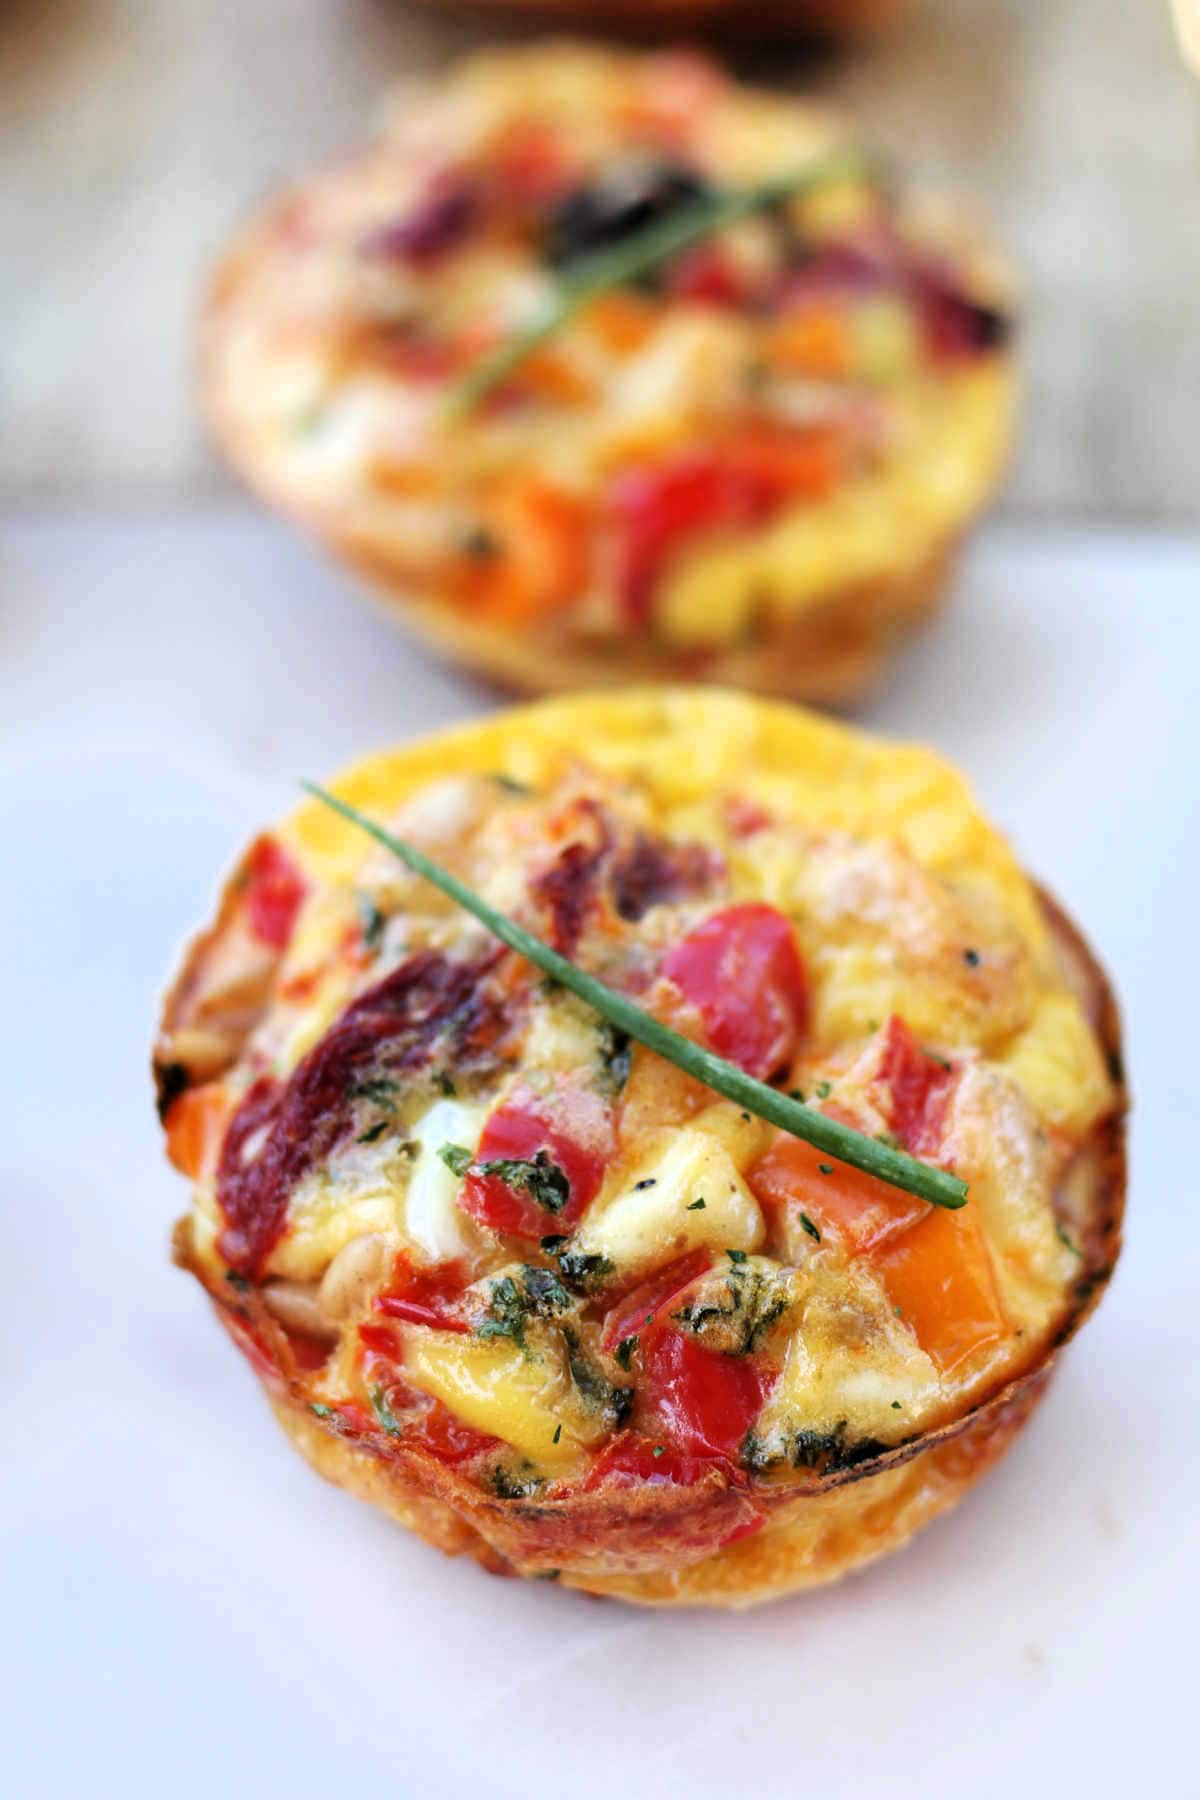 plate with frittata muffins from a muffin pan